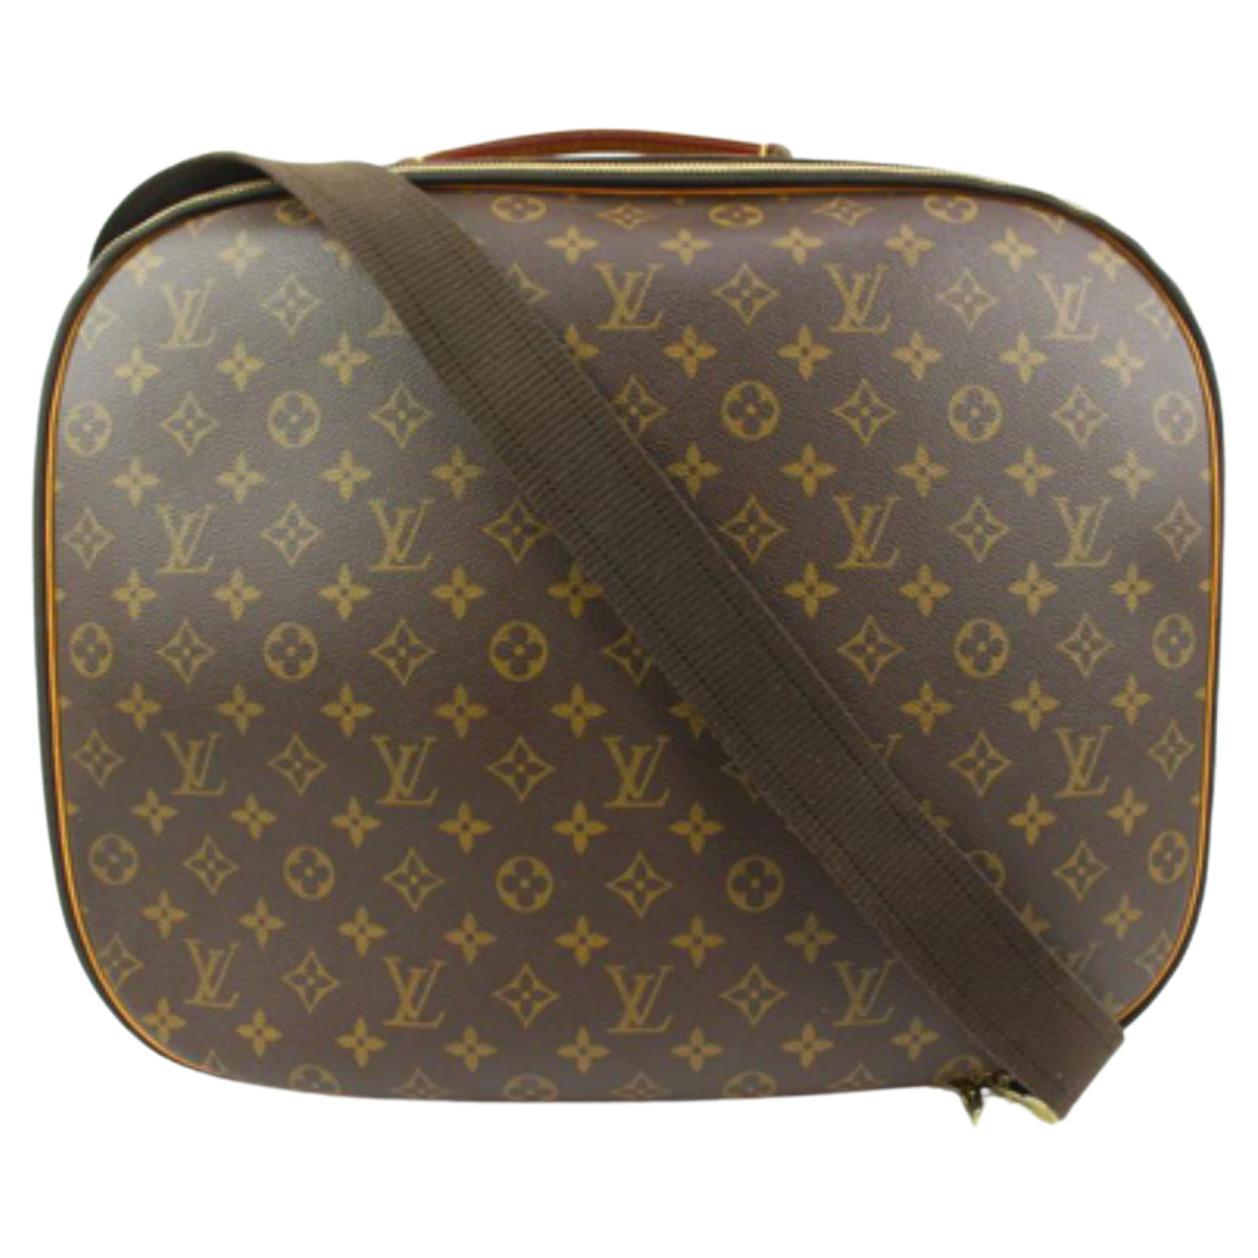 Louis Vuitton Discontinued Monogram Packall PM 2way Bandouliere